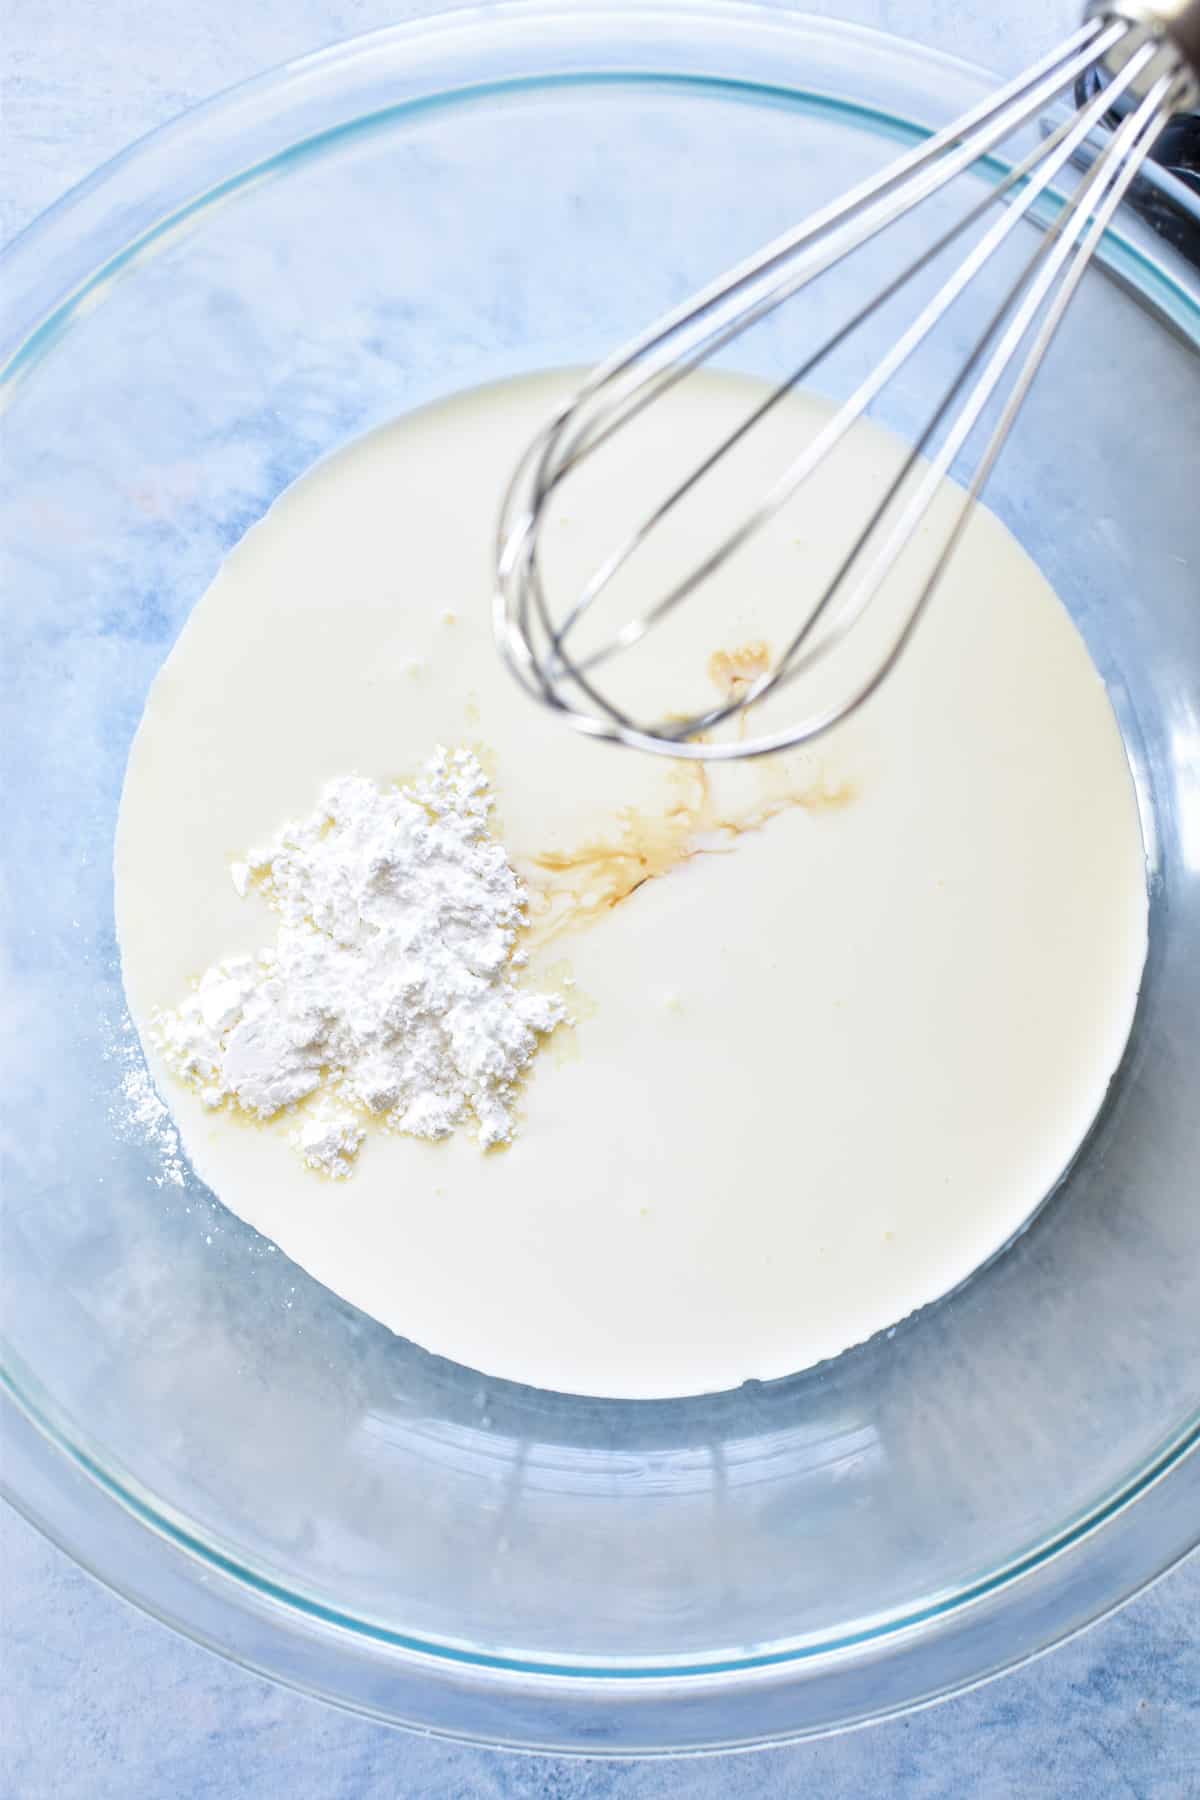 Homemade Cool Whip ingredients in a mixing bowl